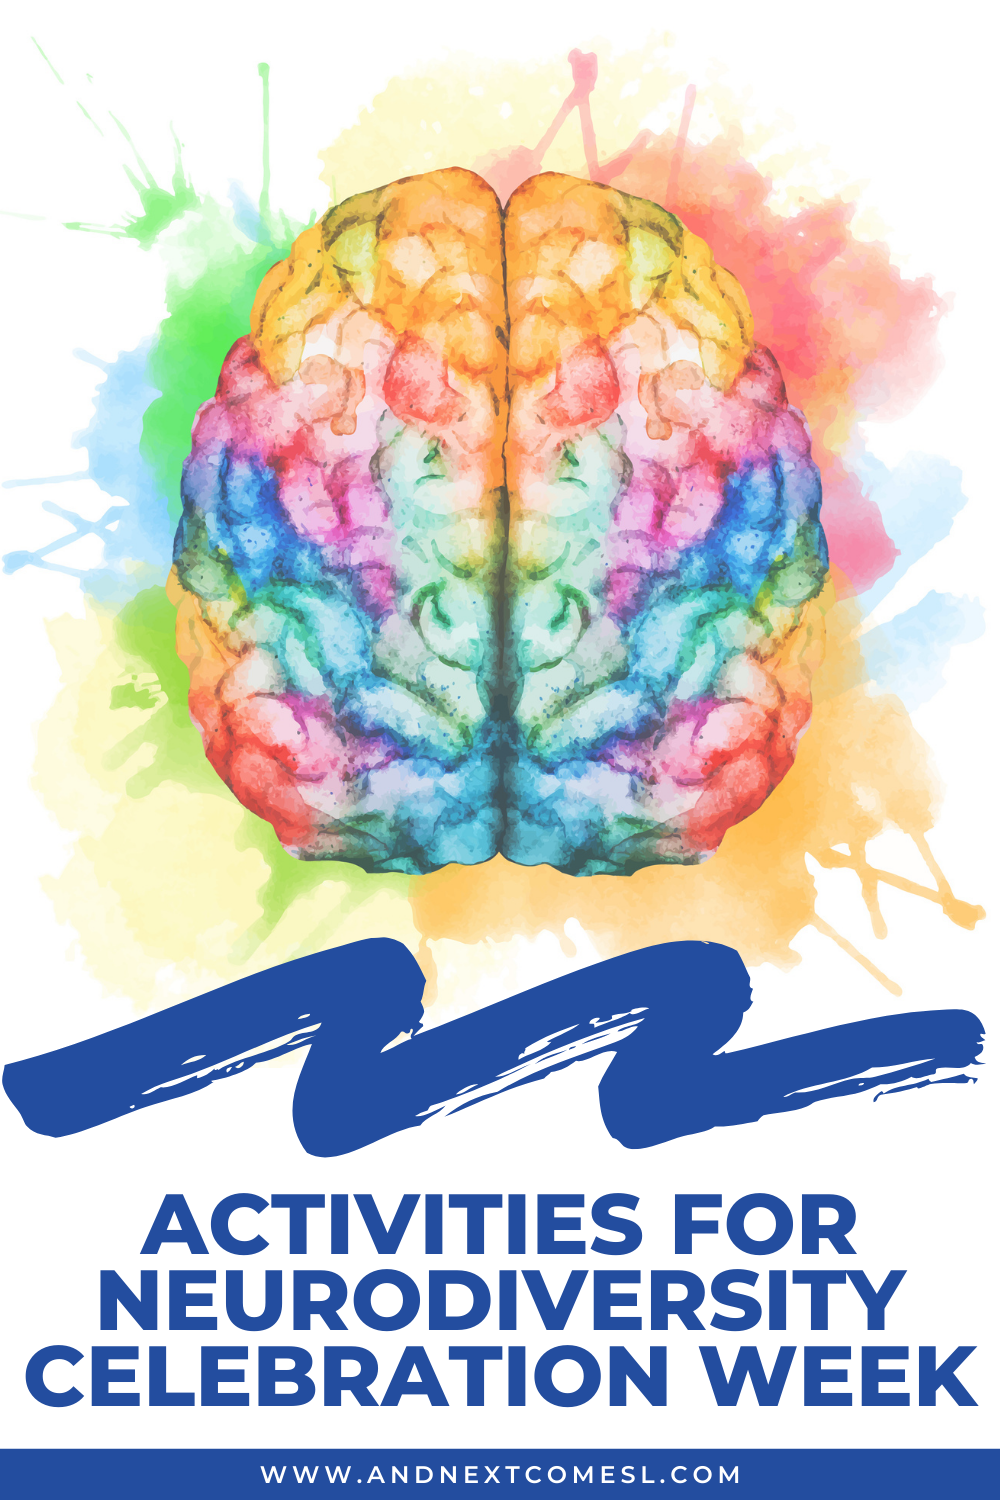 Activities, printables, and resources for participating in Neurodiversity Celebration Week